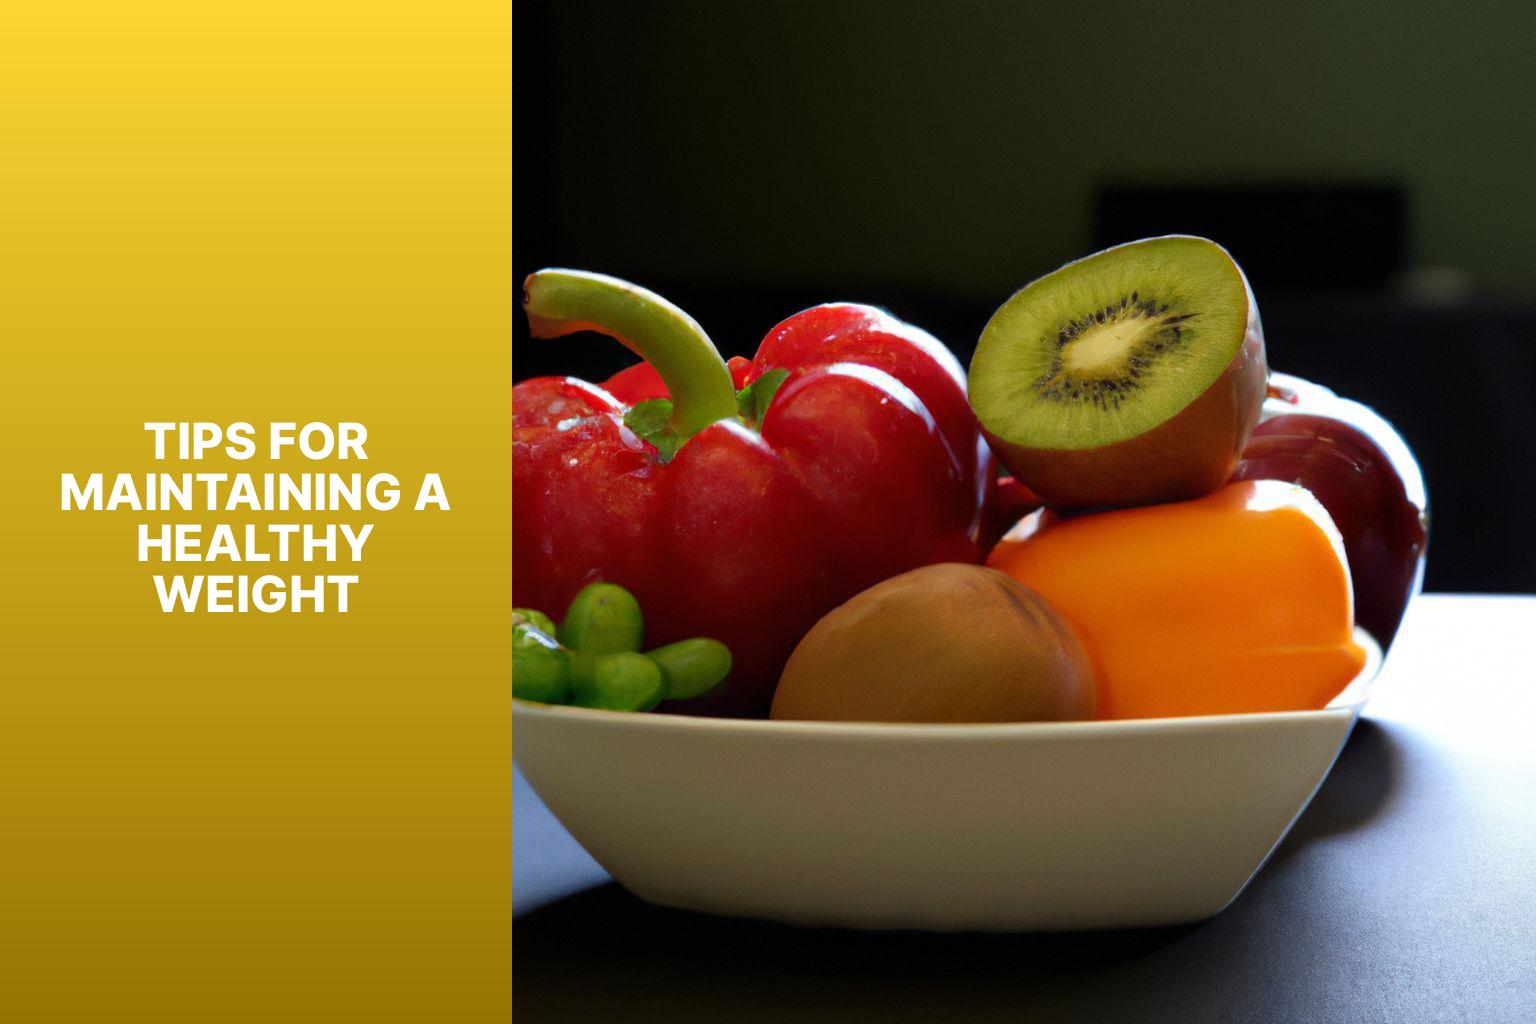 Tips for Maintaining a Healthy Weight - Tips for Maintaining a Healthy Weight 